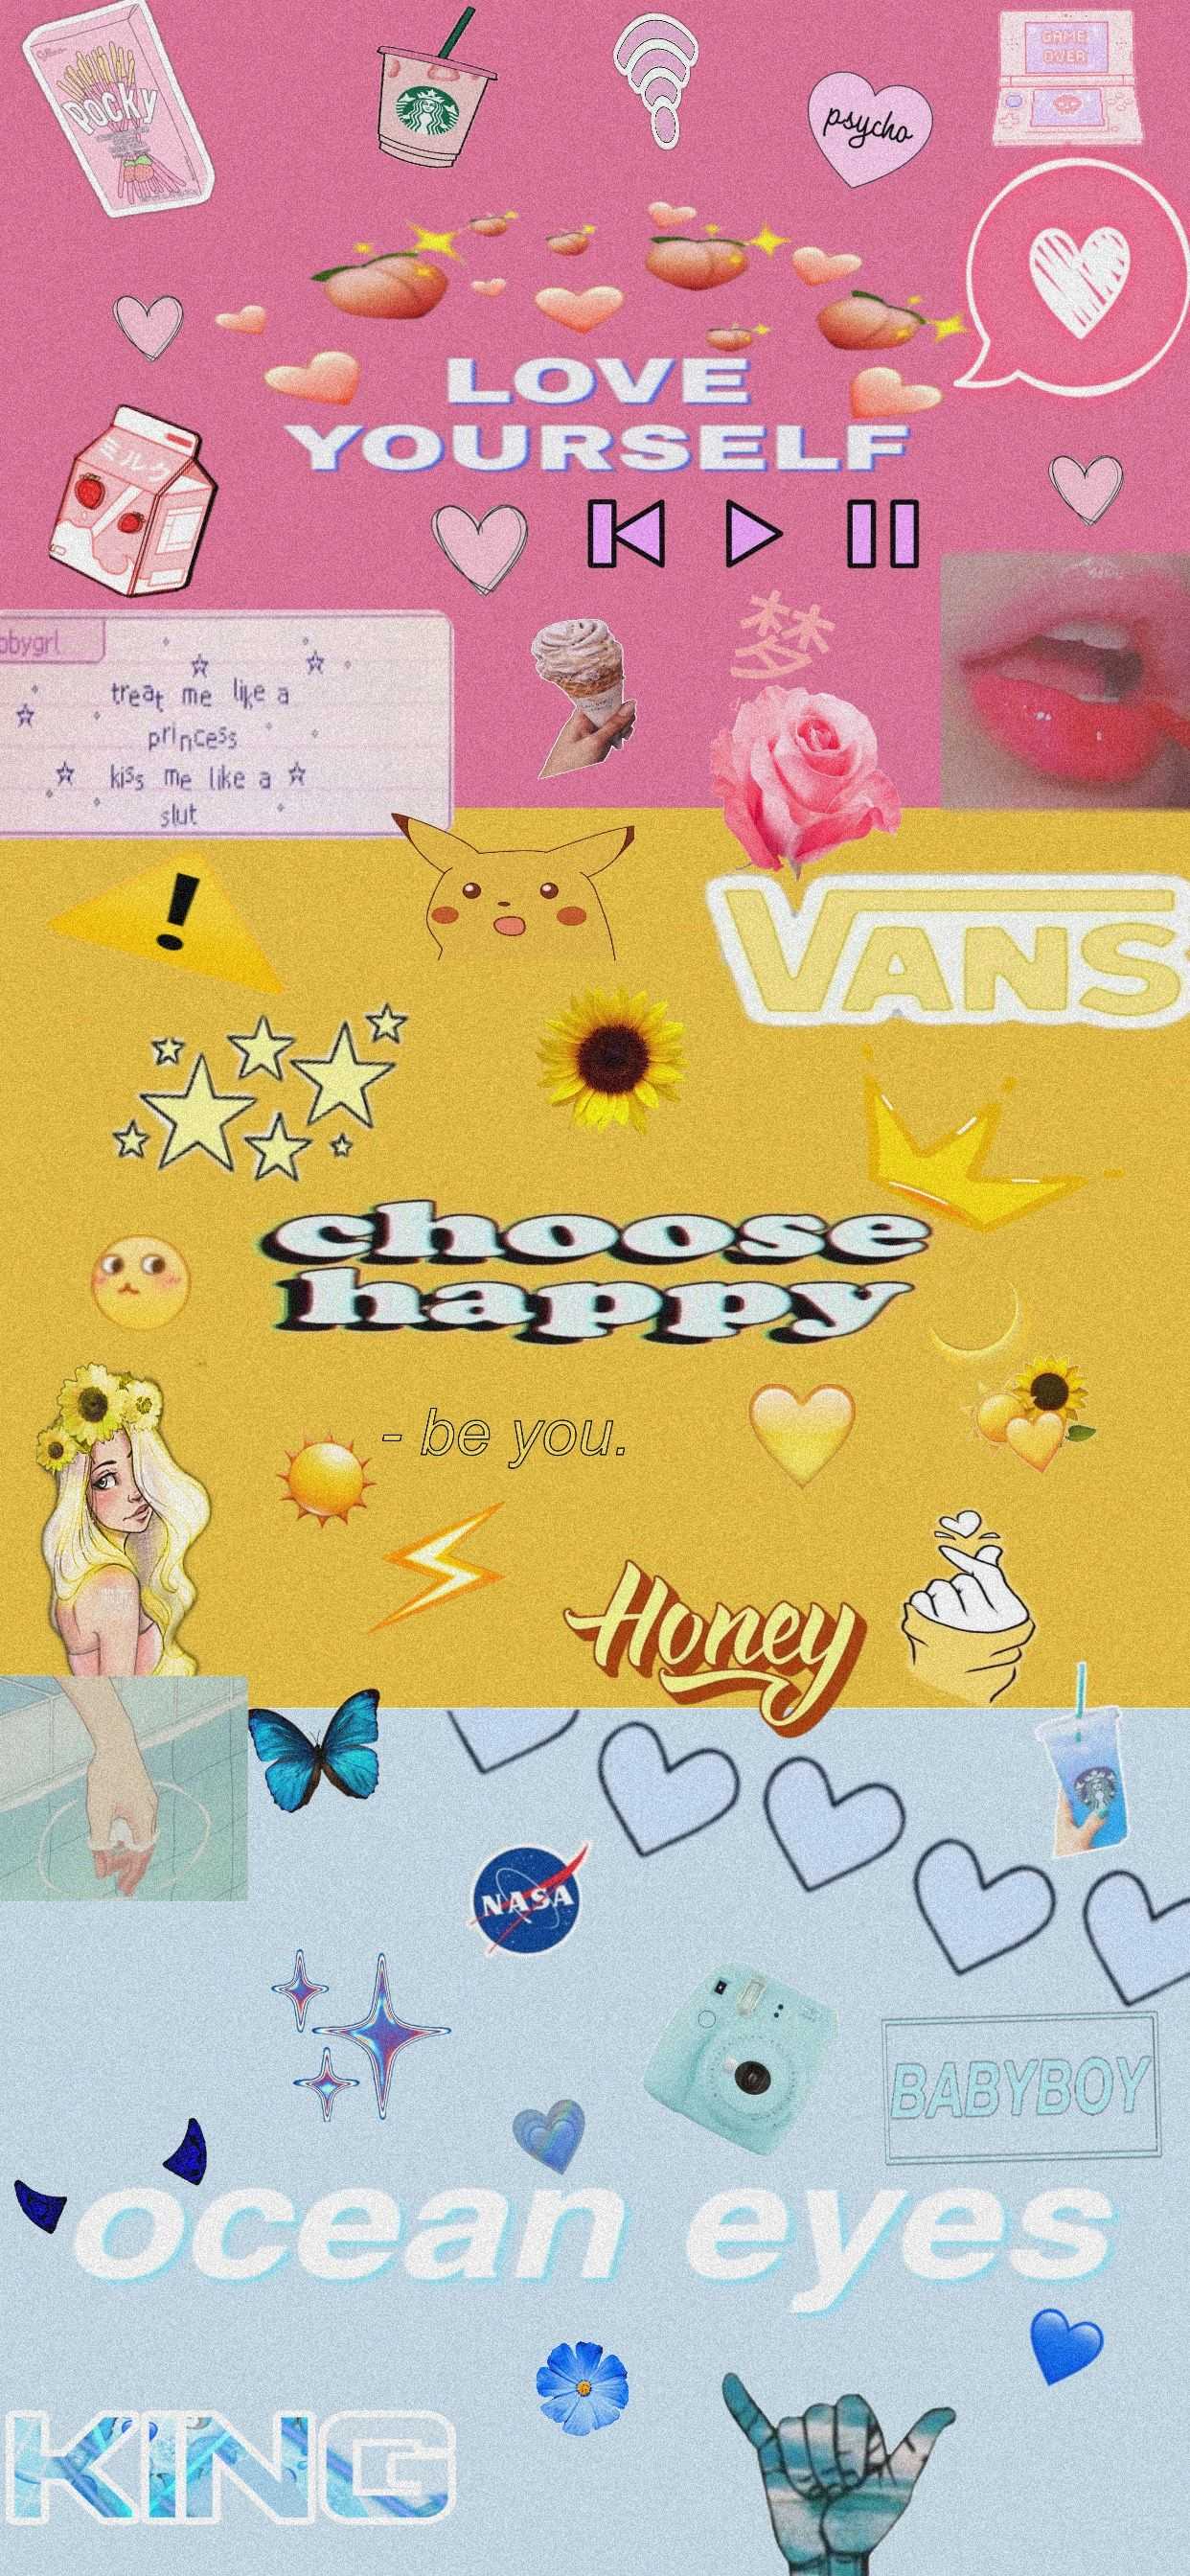 Aesthetic background with different stickers, emojis, and quotes. - Pansexual